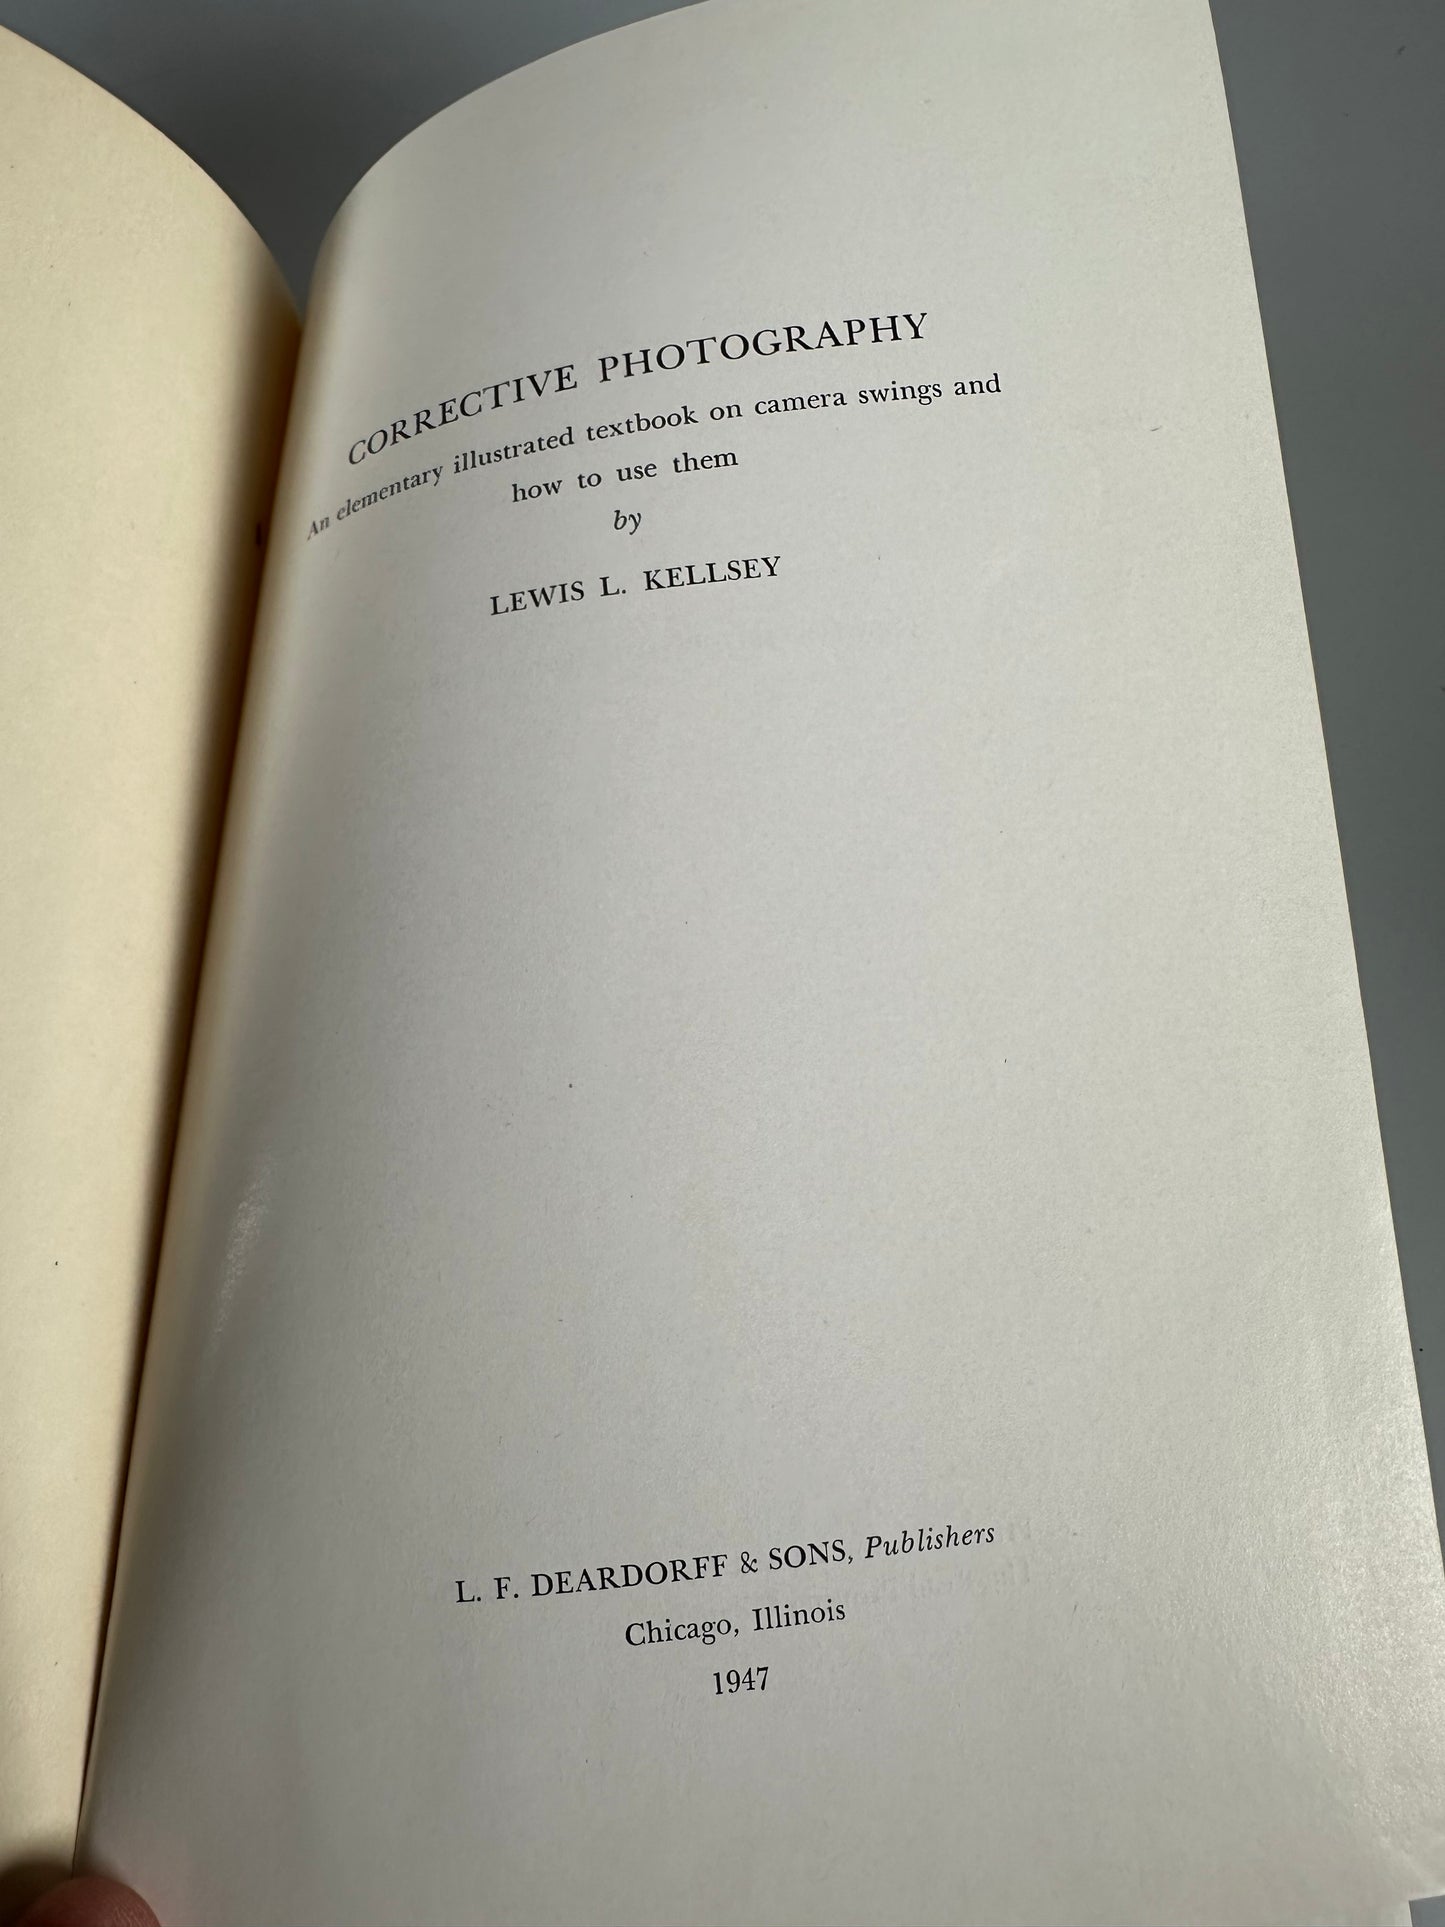 Corrective Photography Camera Swings and How to Use Them, Lewis L. Kellsey 1947